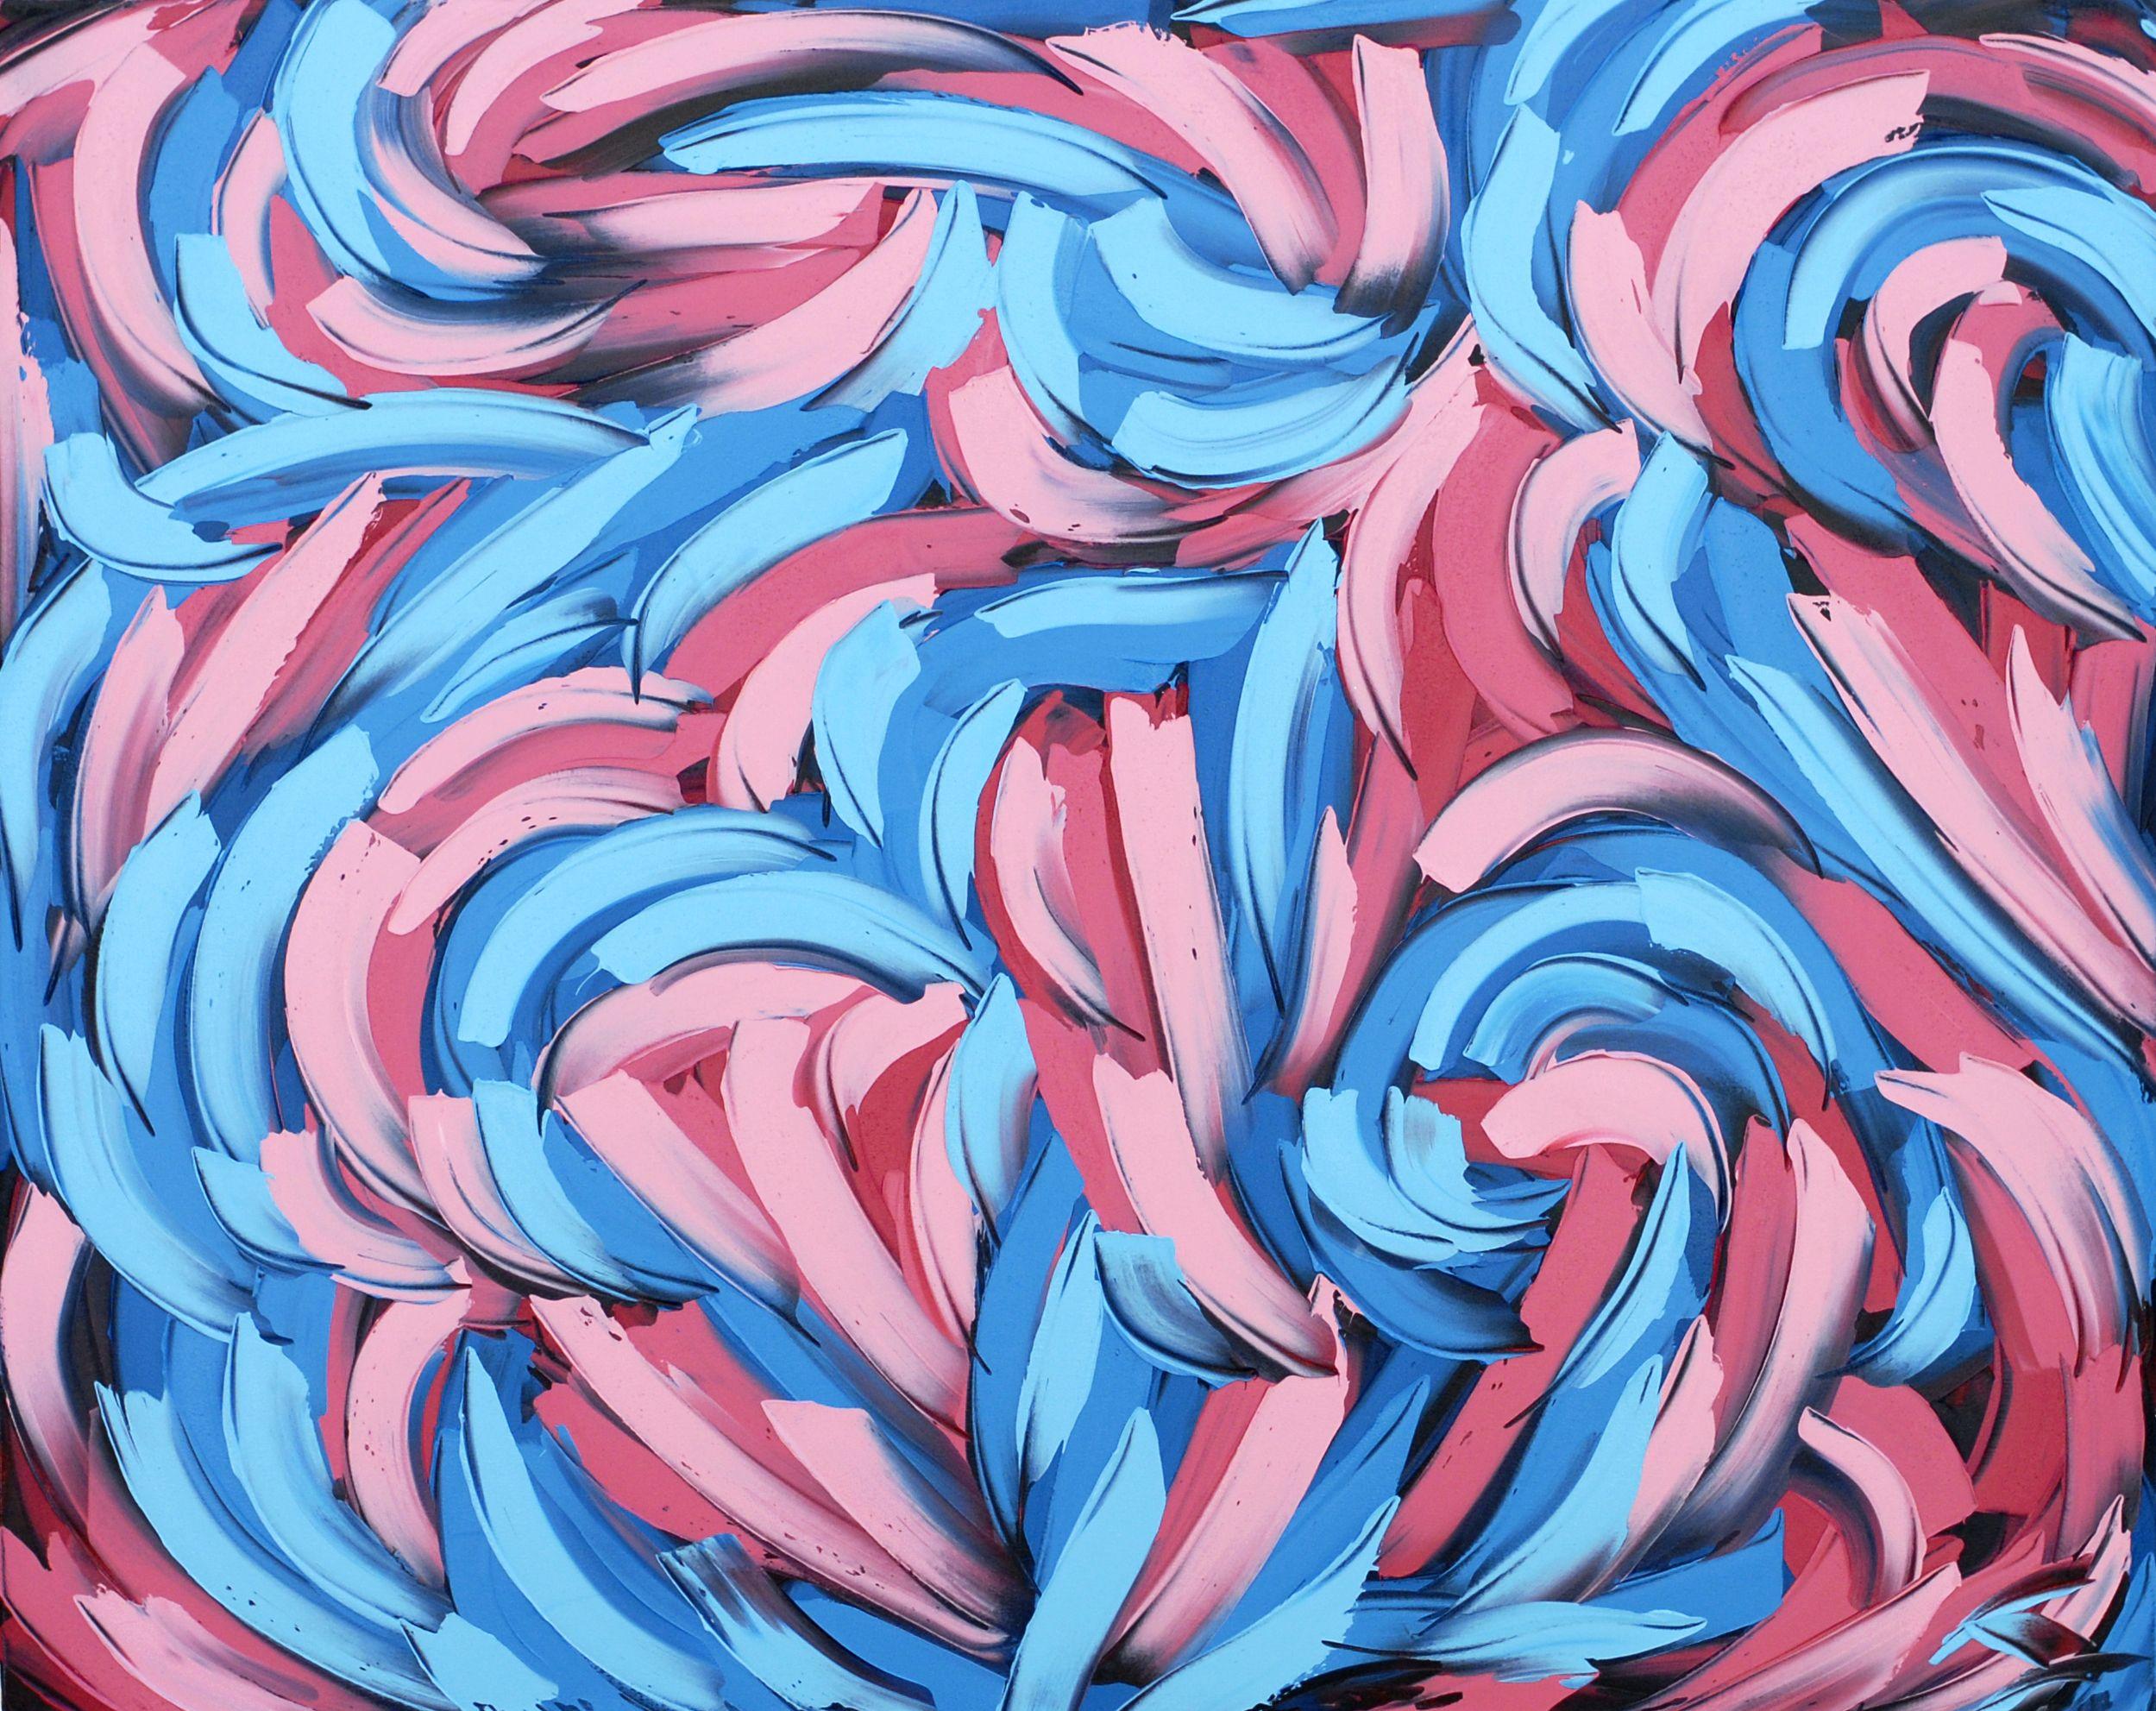 Bill Stone Abstract Painting - PINK & BLUE, Painting, Oil on Canvas